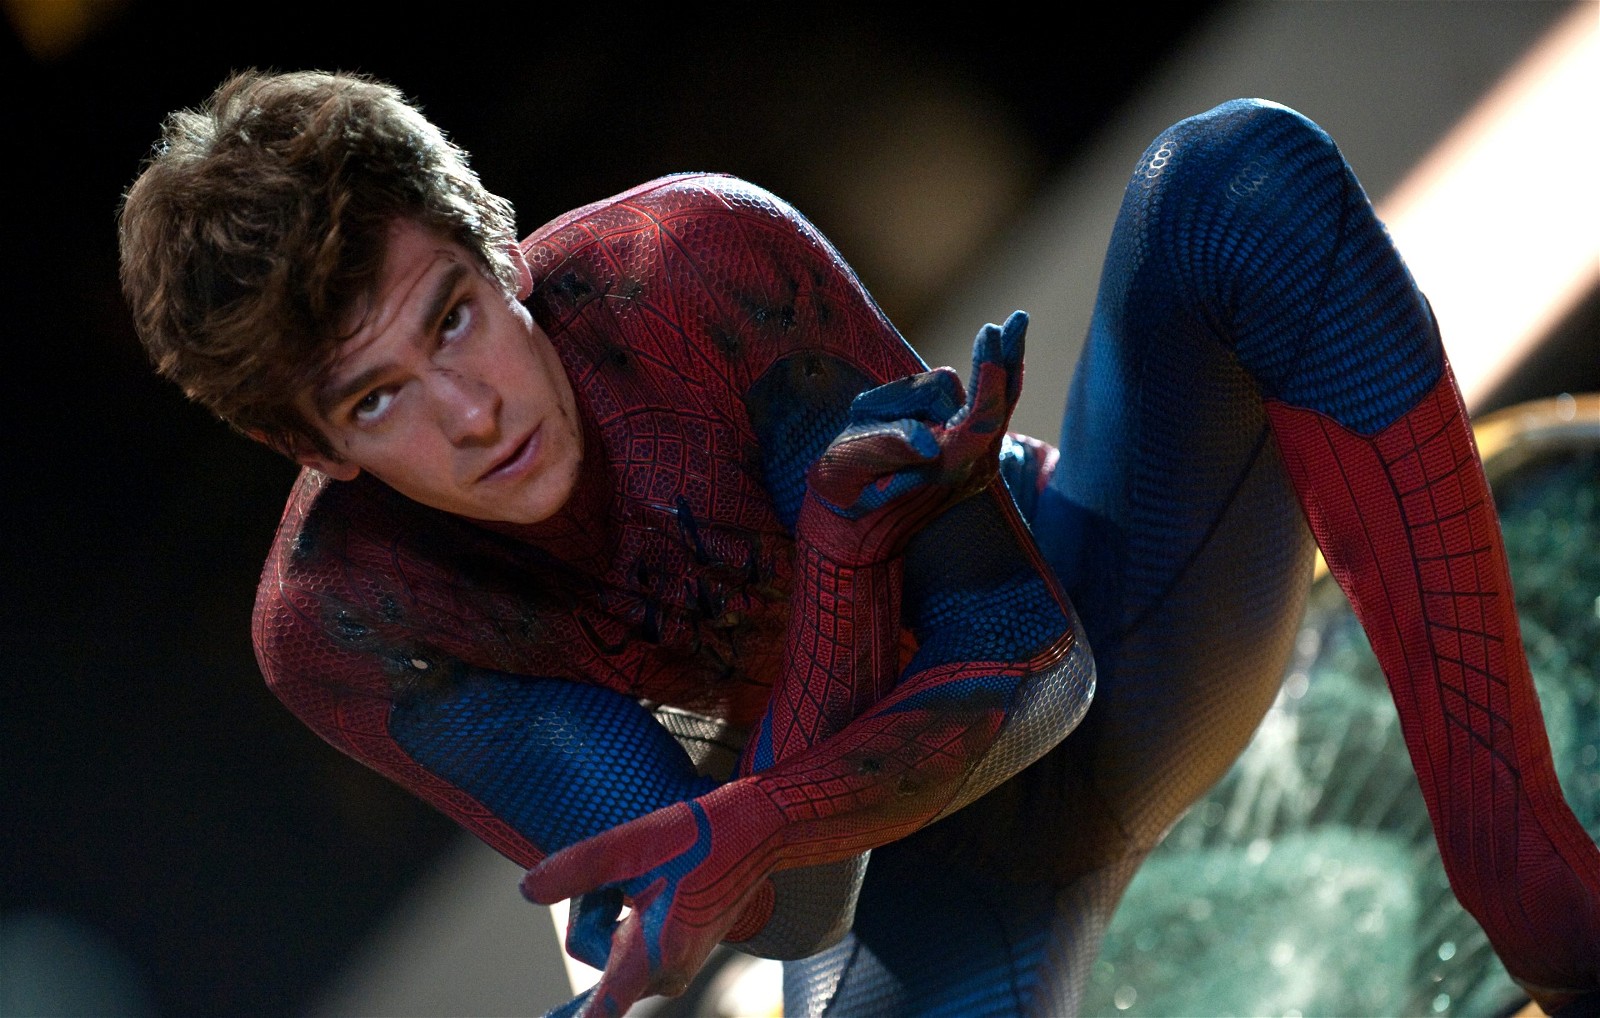 Andrew Garfield suits up as Spider-Man in The Amazing Spider-Man